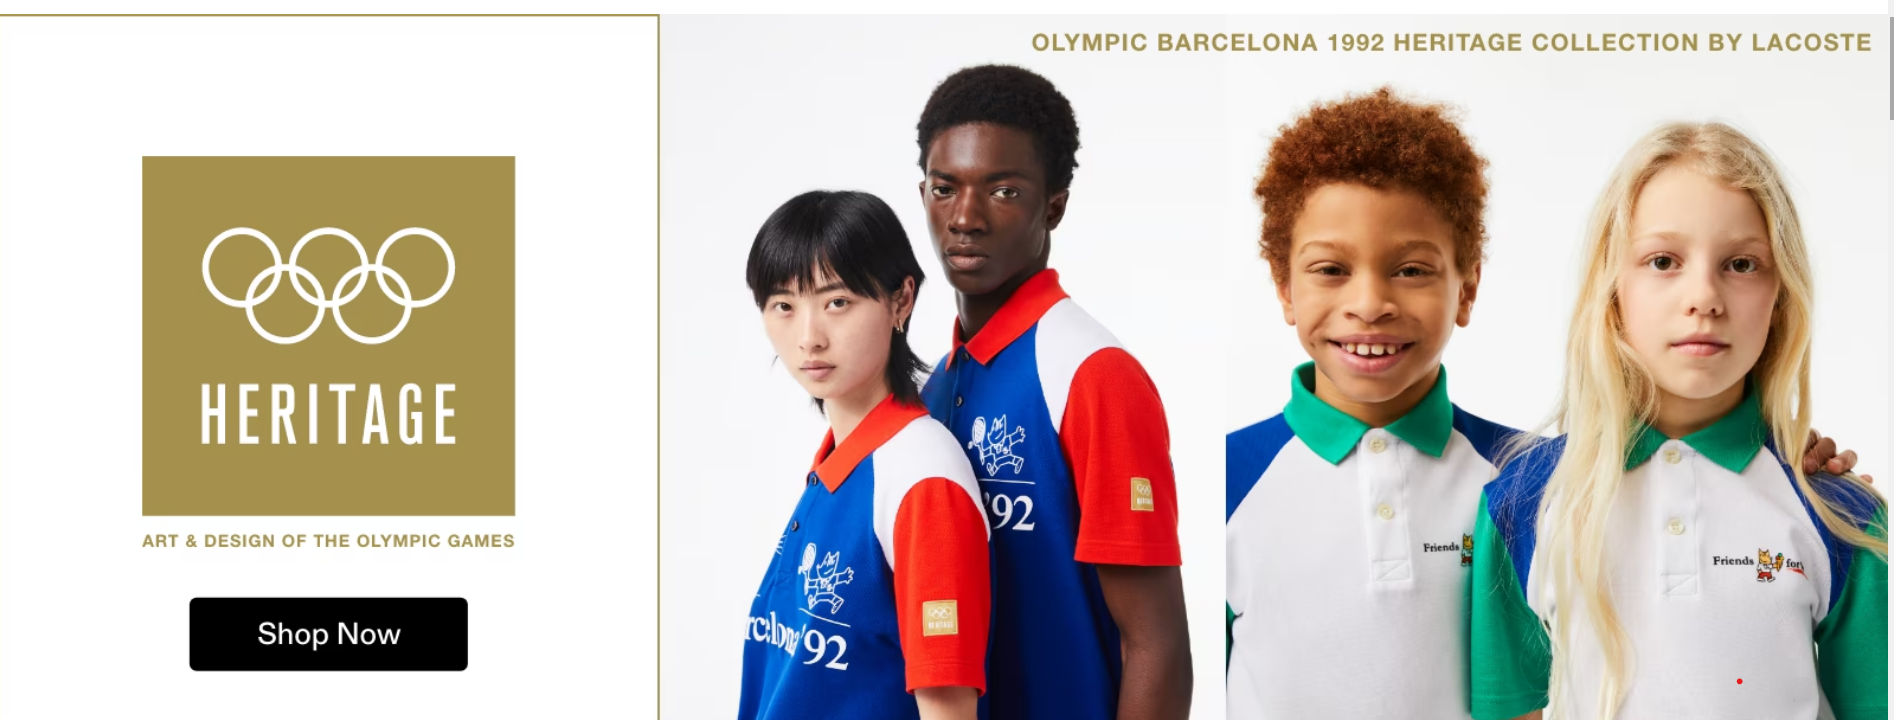 Barcelona 1992 apparel and accessories re-launched in Lacoste and IOC partnership